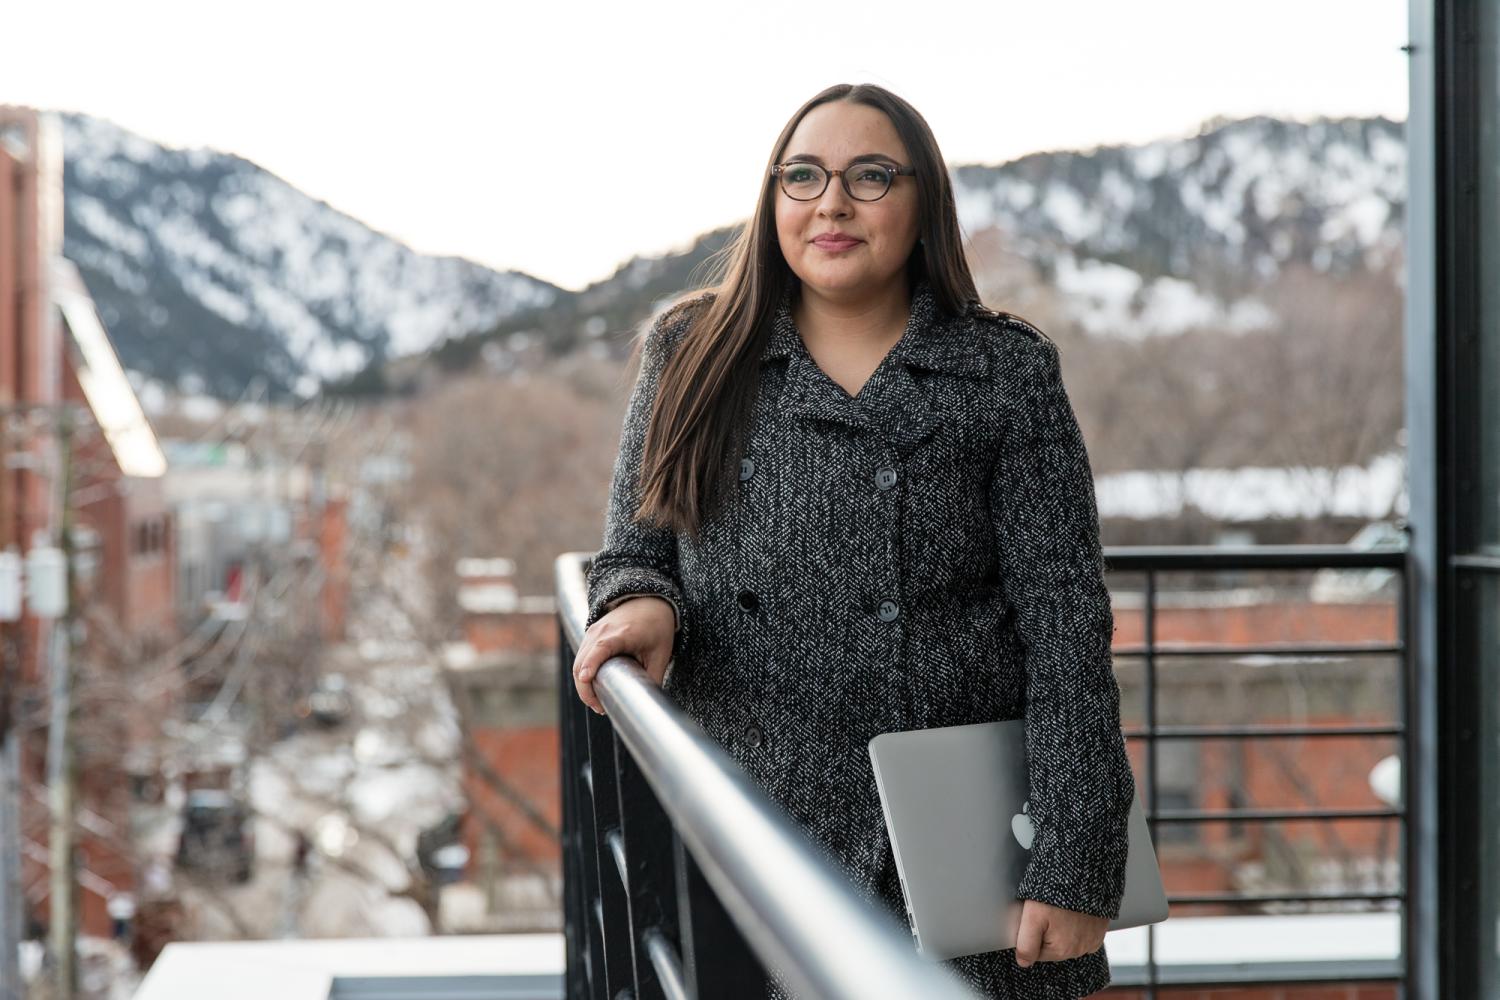 A student poses outside on a balcony with the snowy Boulder foothills in the background